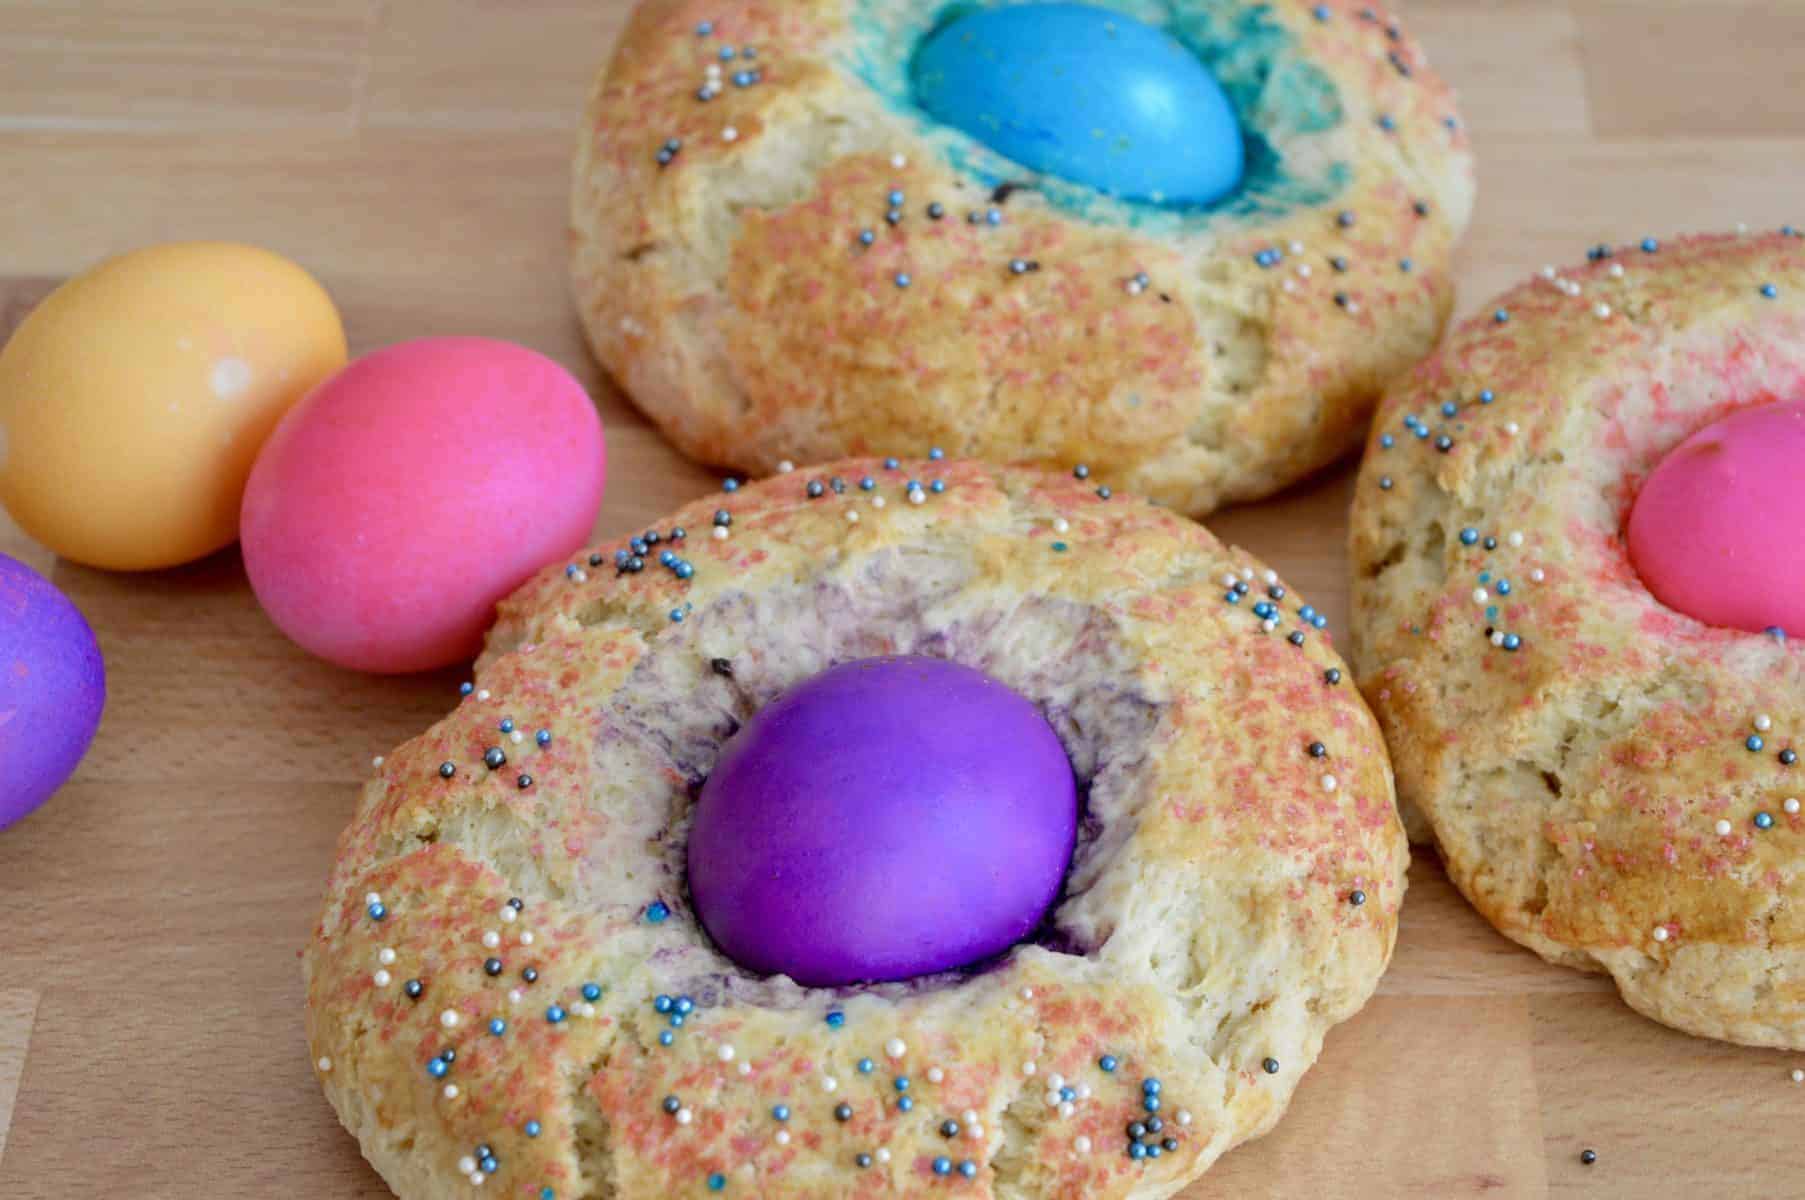 Italian easter bread with sprinkles and a colored egg in the center.